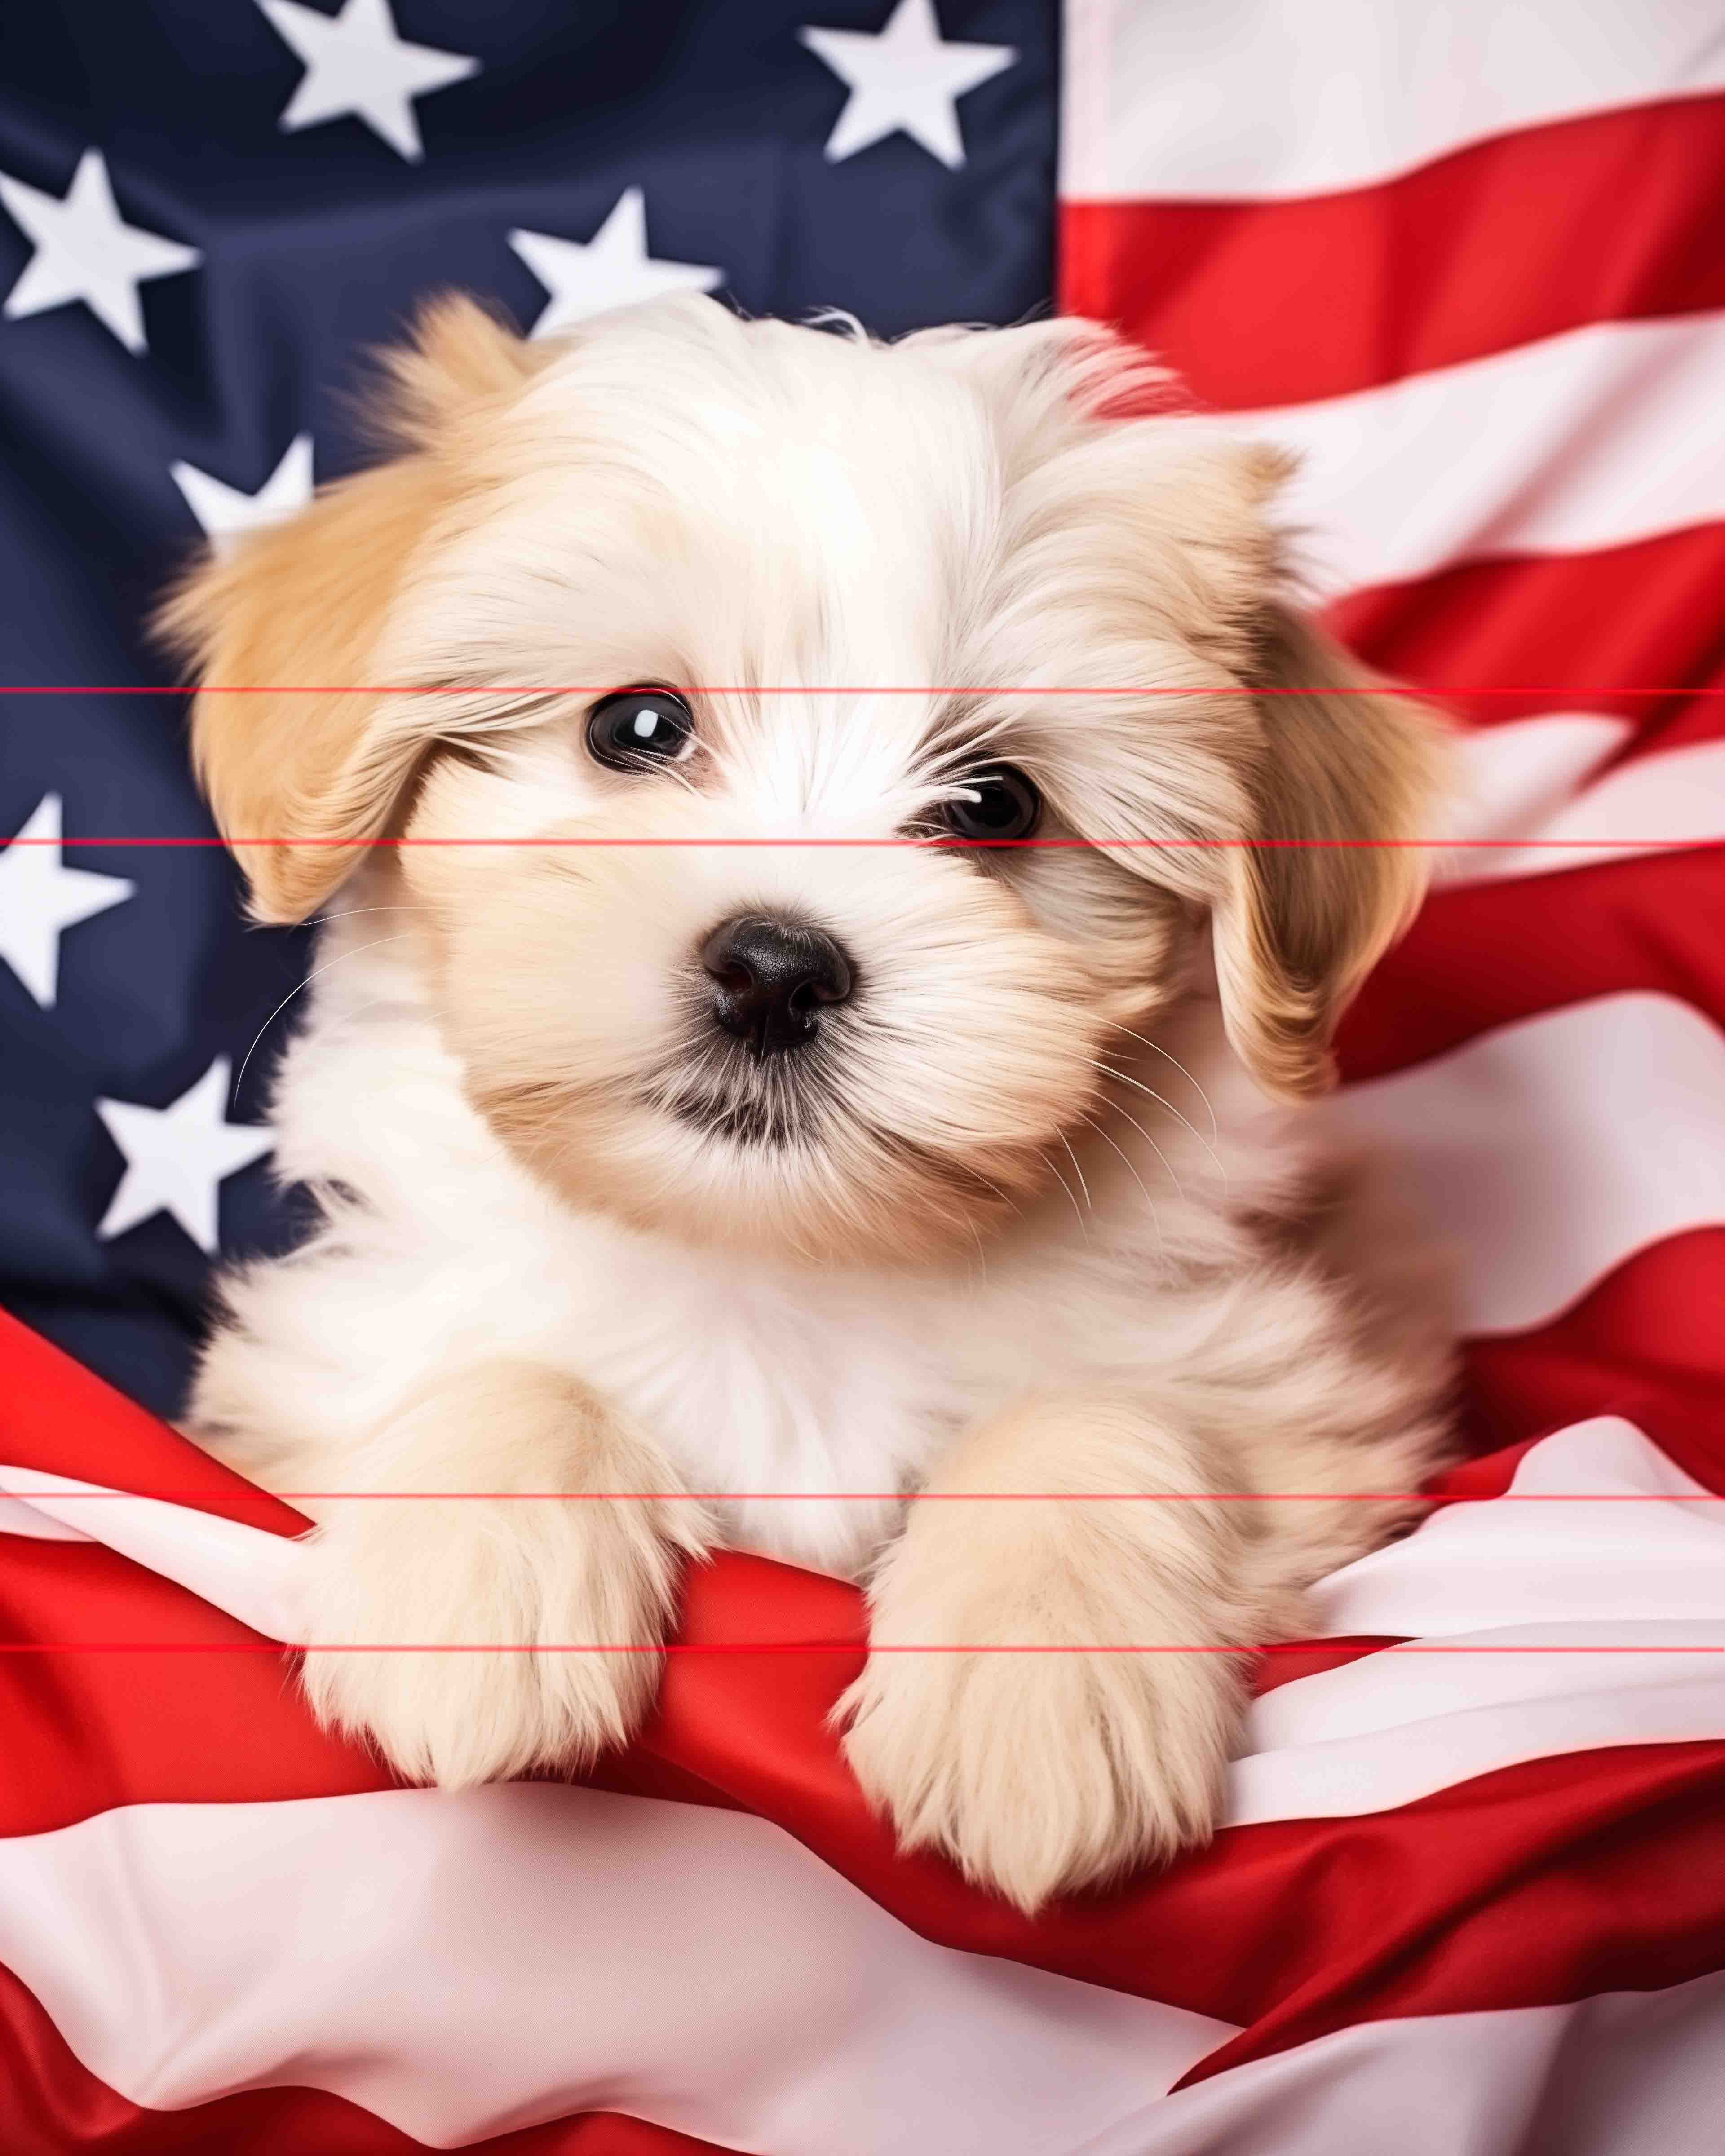 A small, fluffy Havanese with expressive eyes and long gray and black fur sits in front of an american flag, its sweet face looking directly towards the viewer.